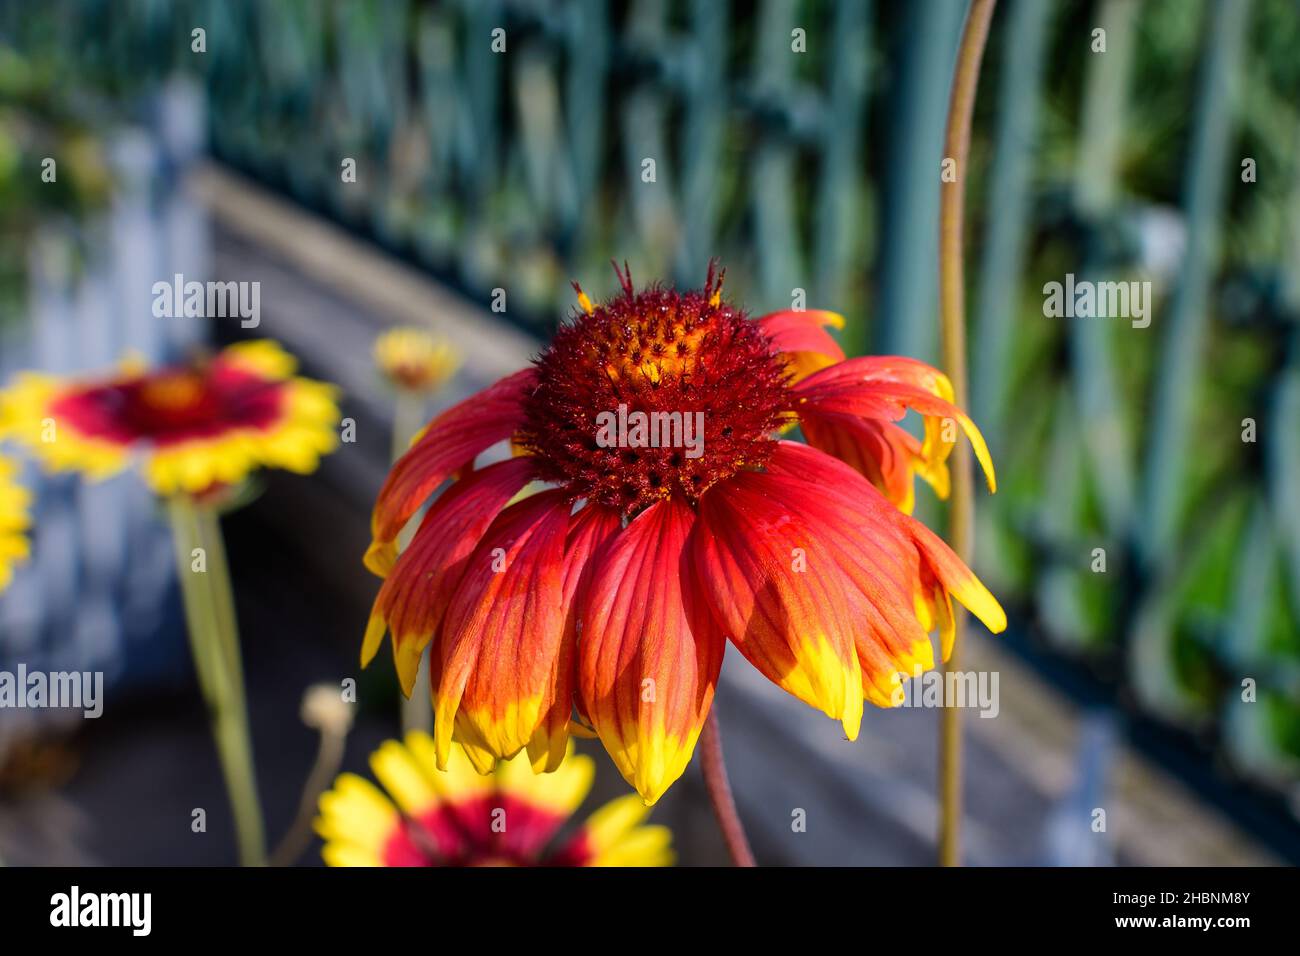 One vivid yellow and red Gaillardia flower, common known as blanket flower,  and blurred green leaves in soft focus, in a garden in a sunny summer day Stock Photo